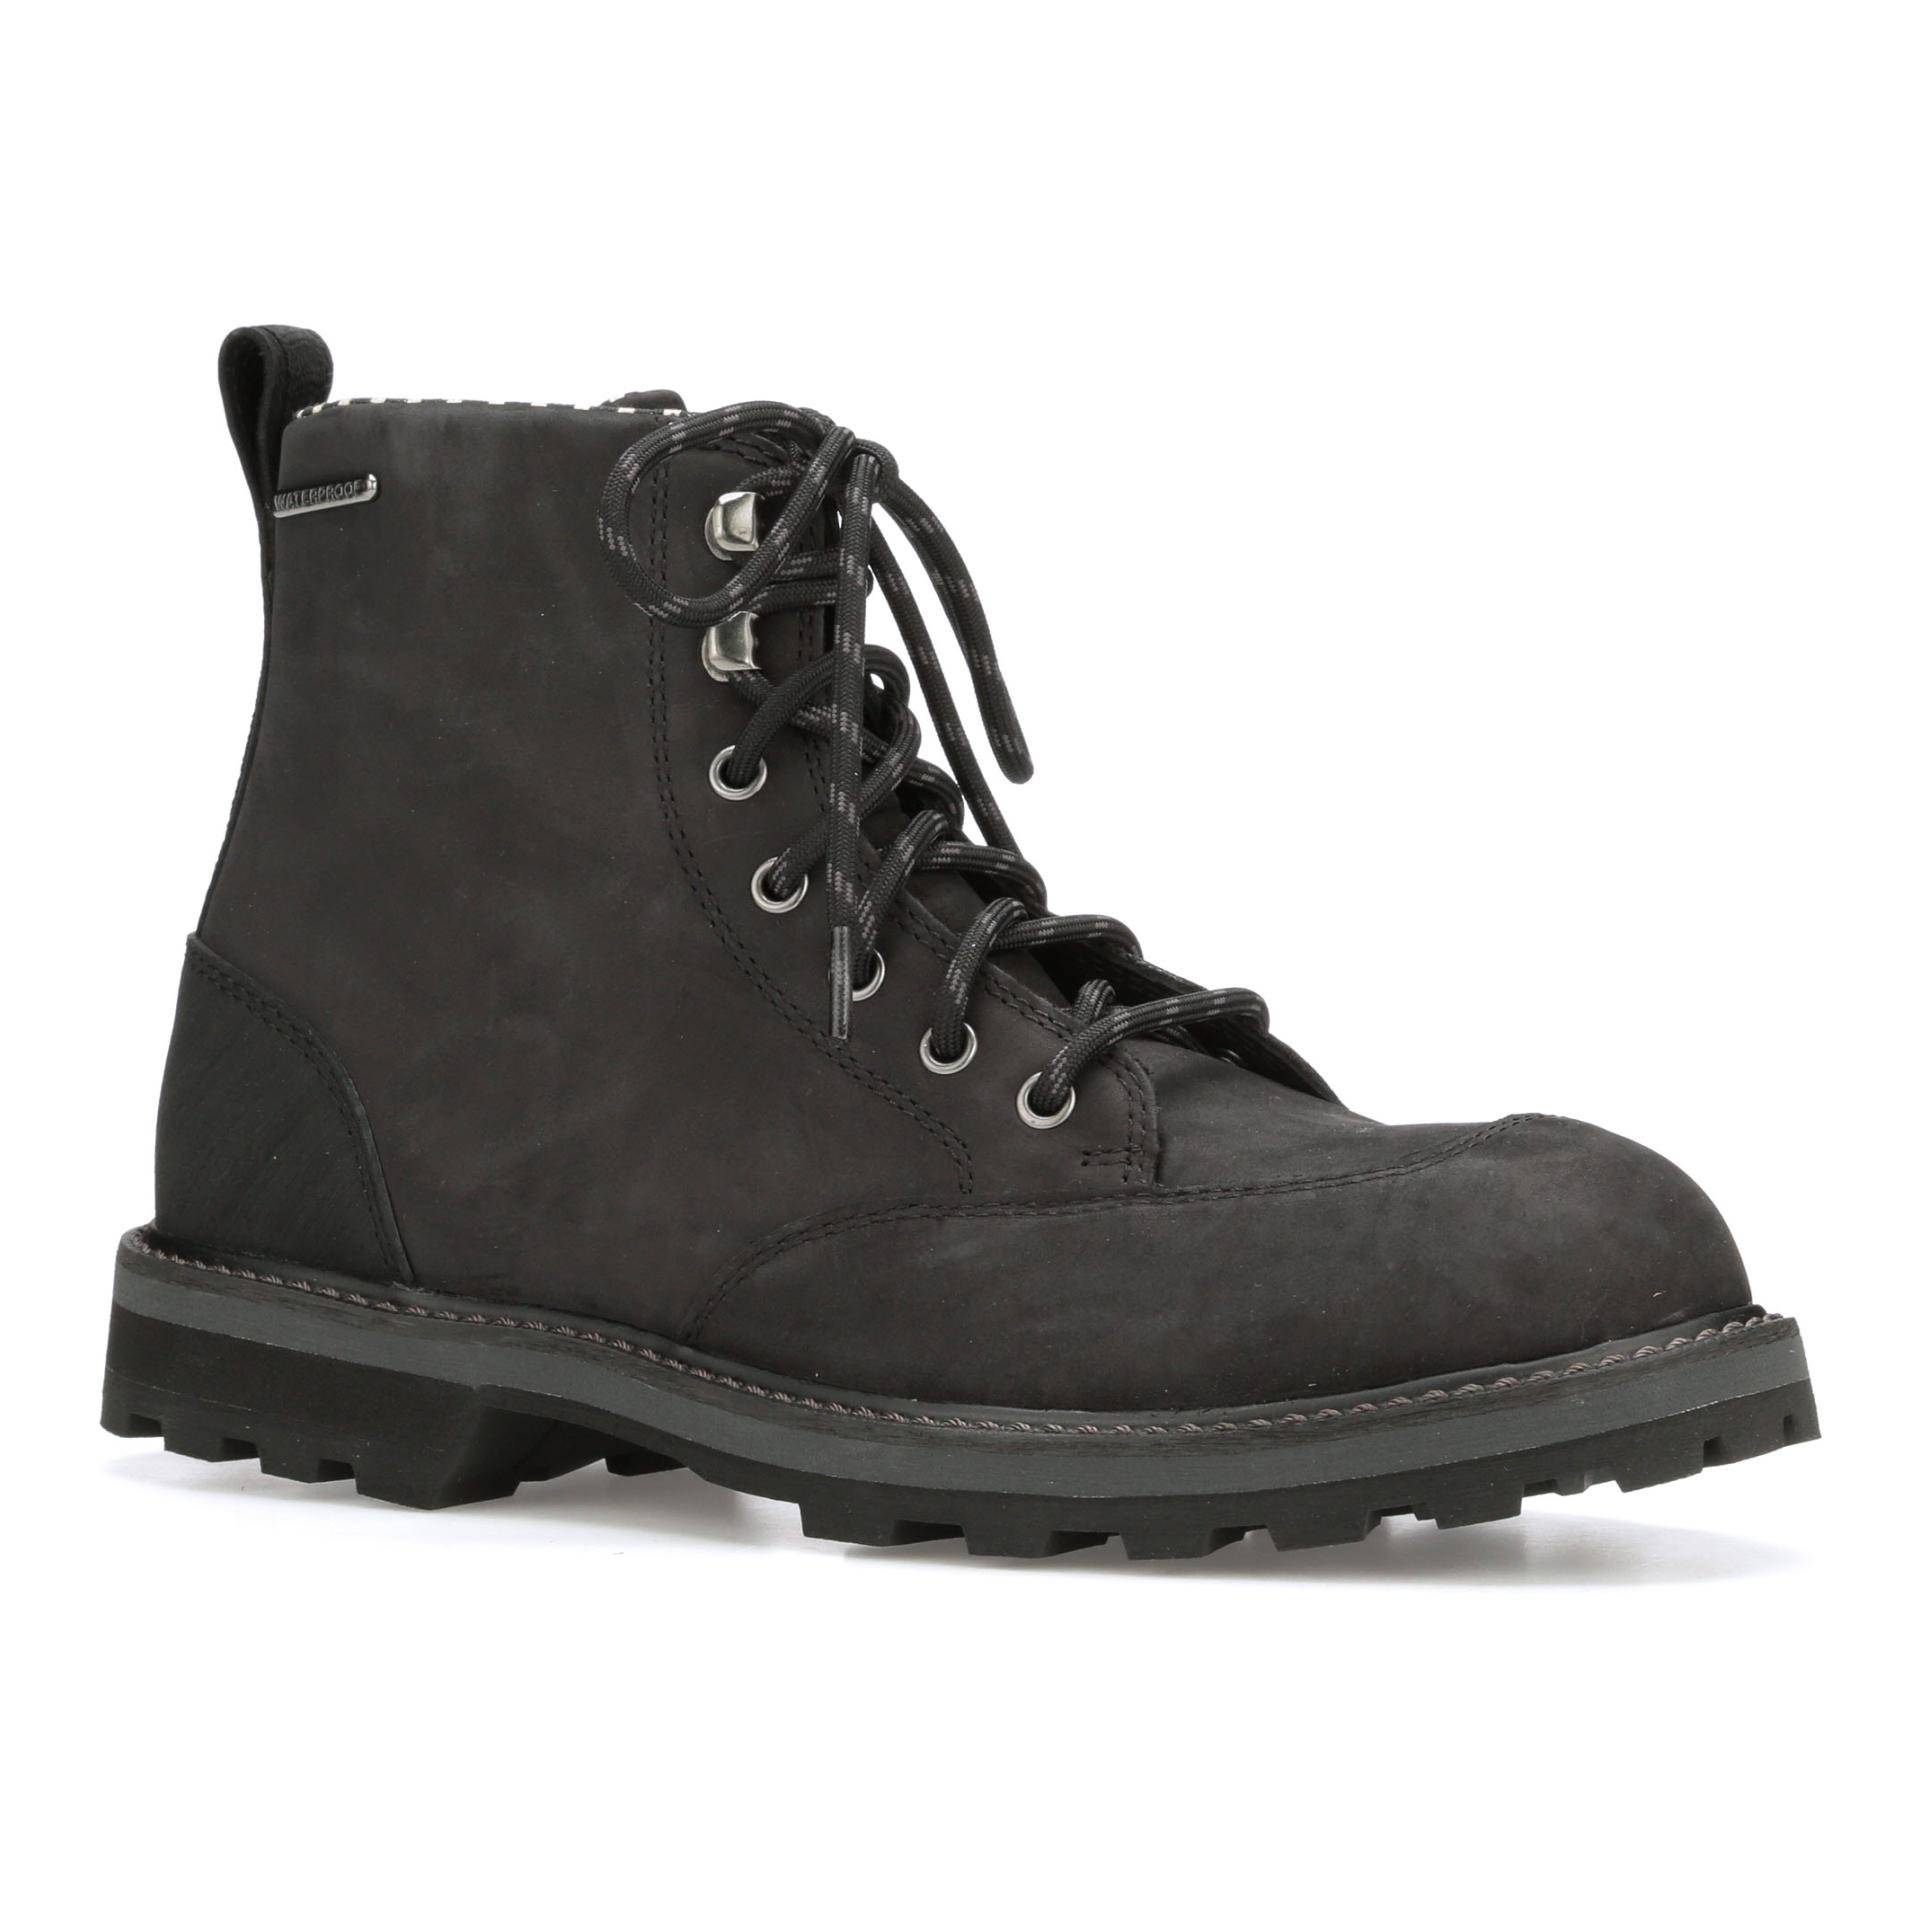 The Original Muck Boot Company Stiefel Foreman Schwarz    47   Grösse: 47 von The Original Muck Boot Company